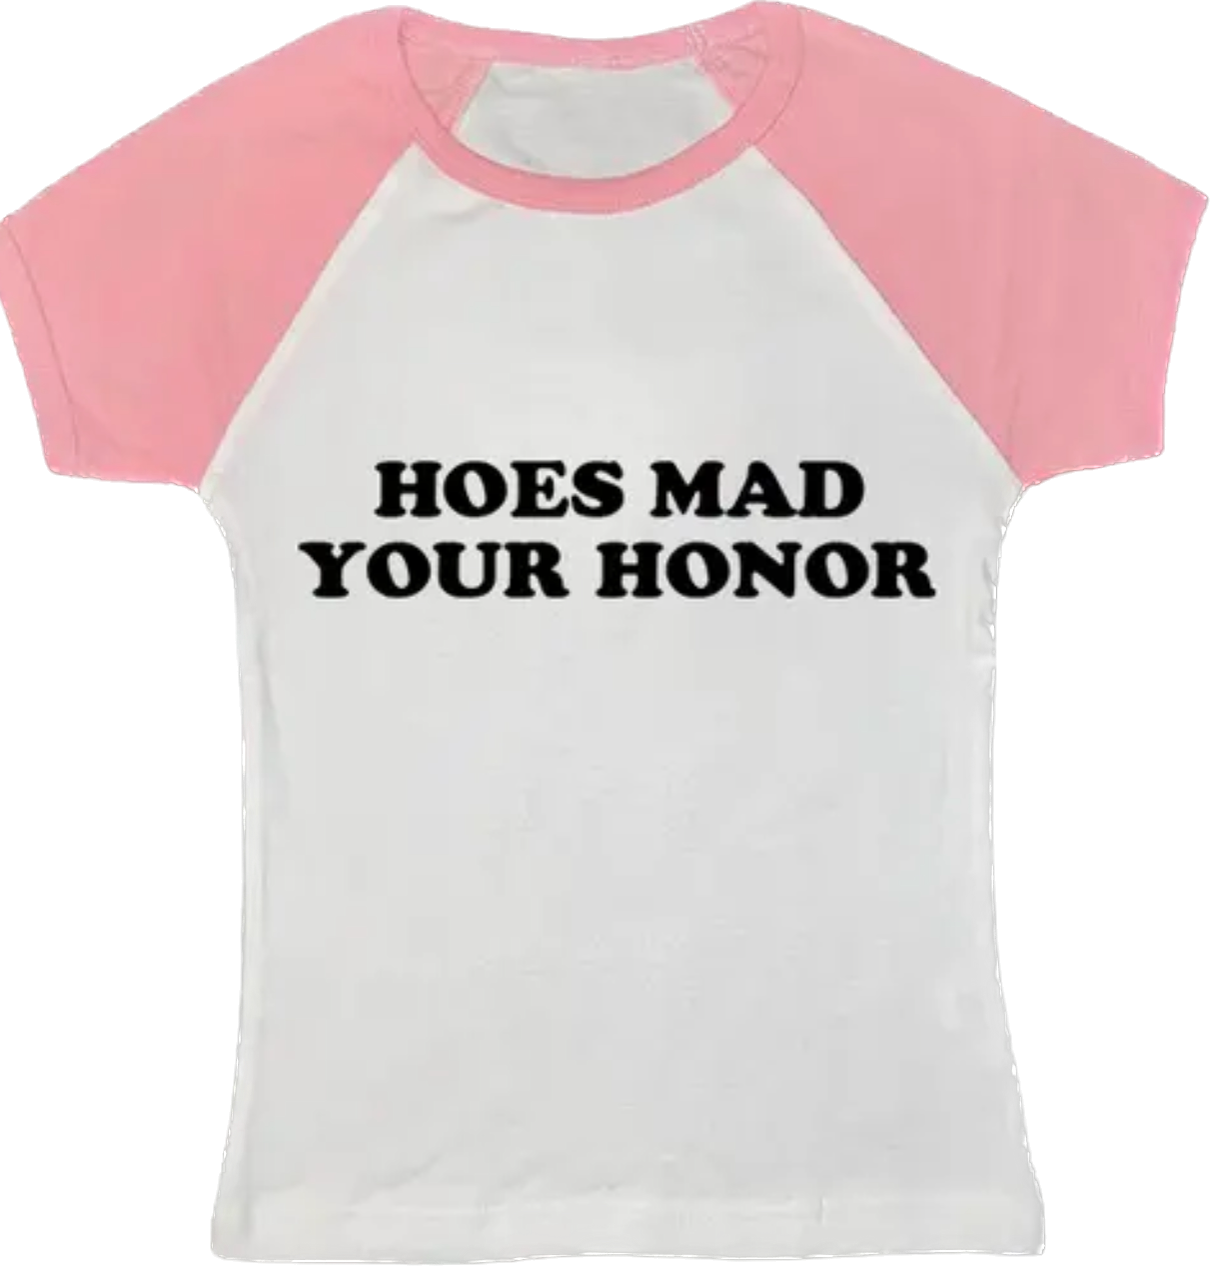 Hoes mad tee